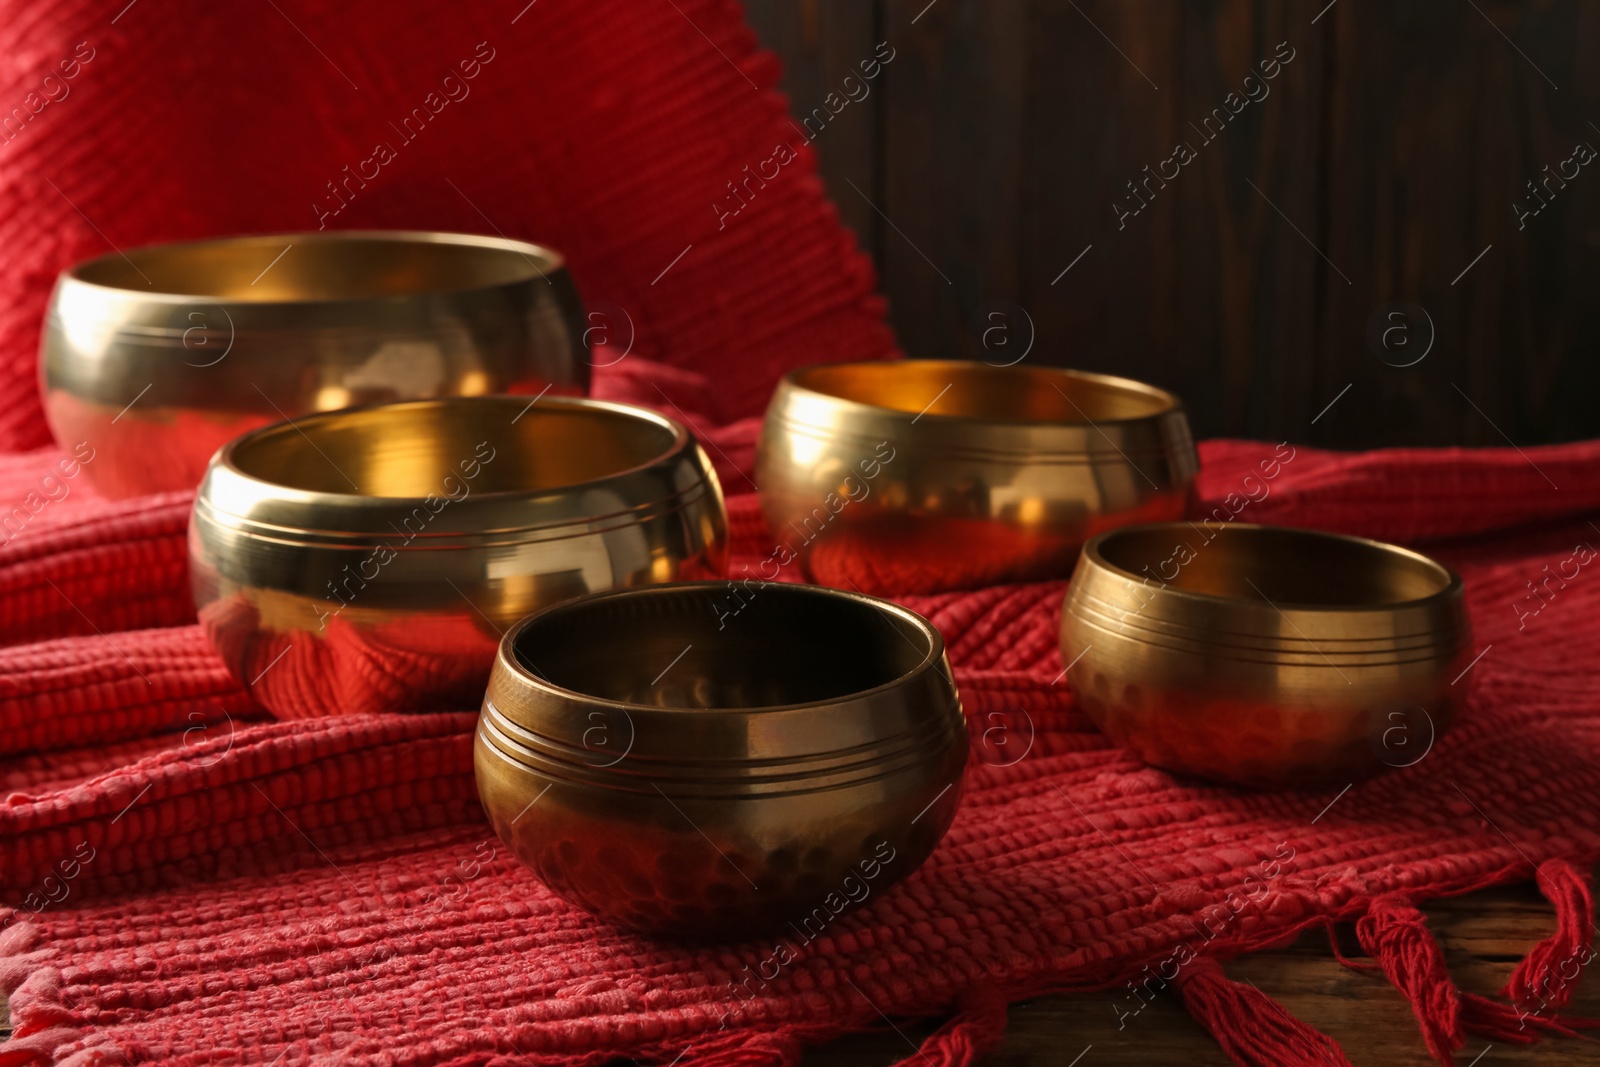 Photo of Tibetan singing bowls and red fabric on wooden table